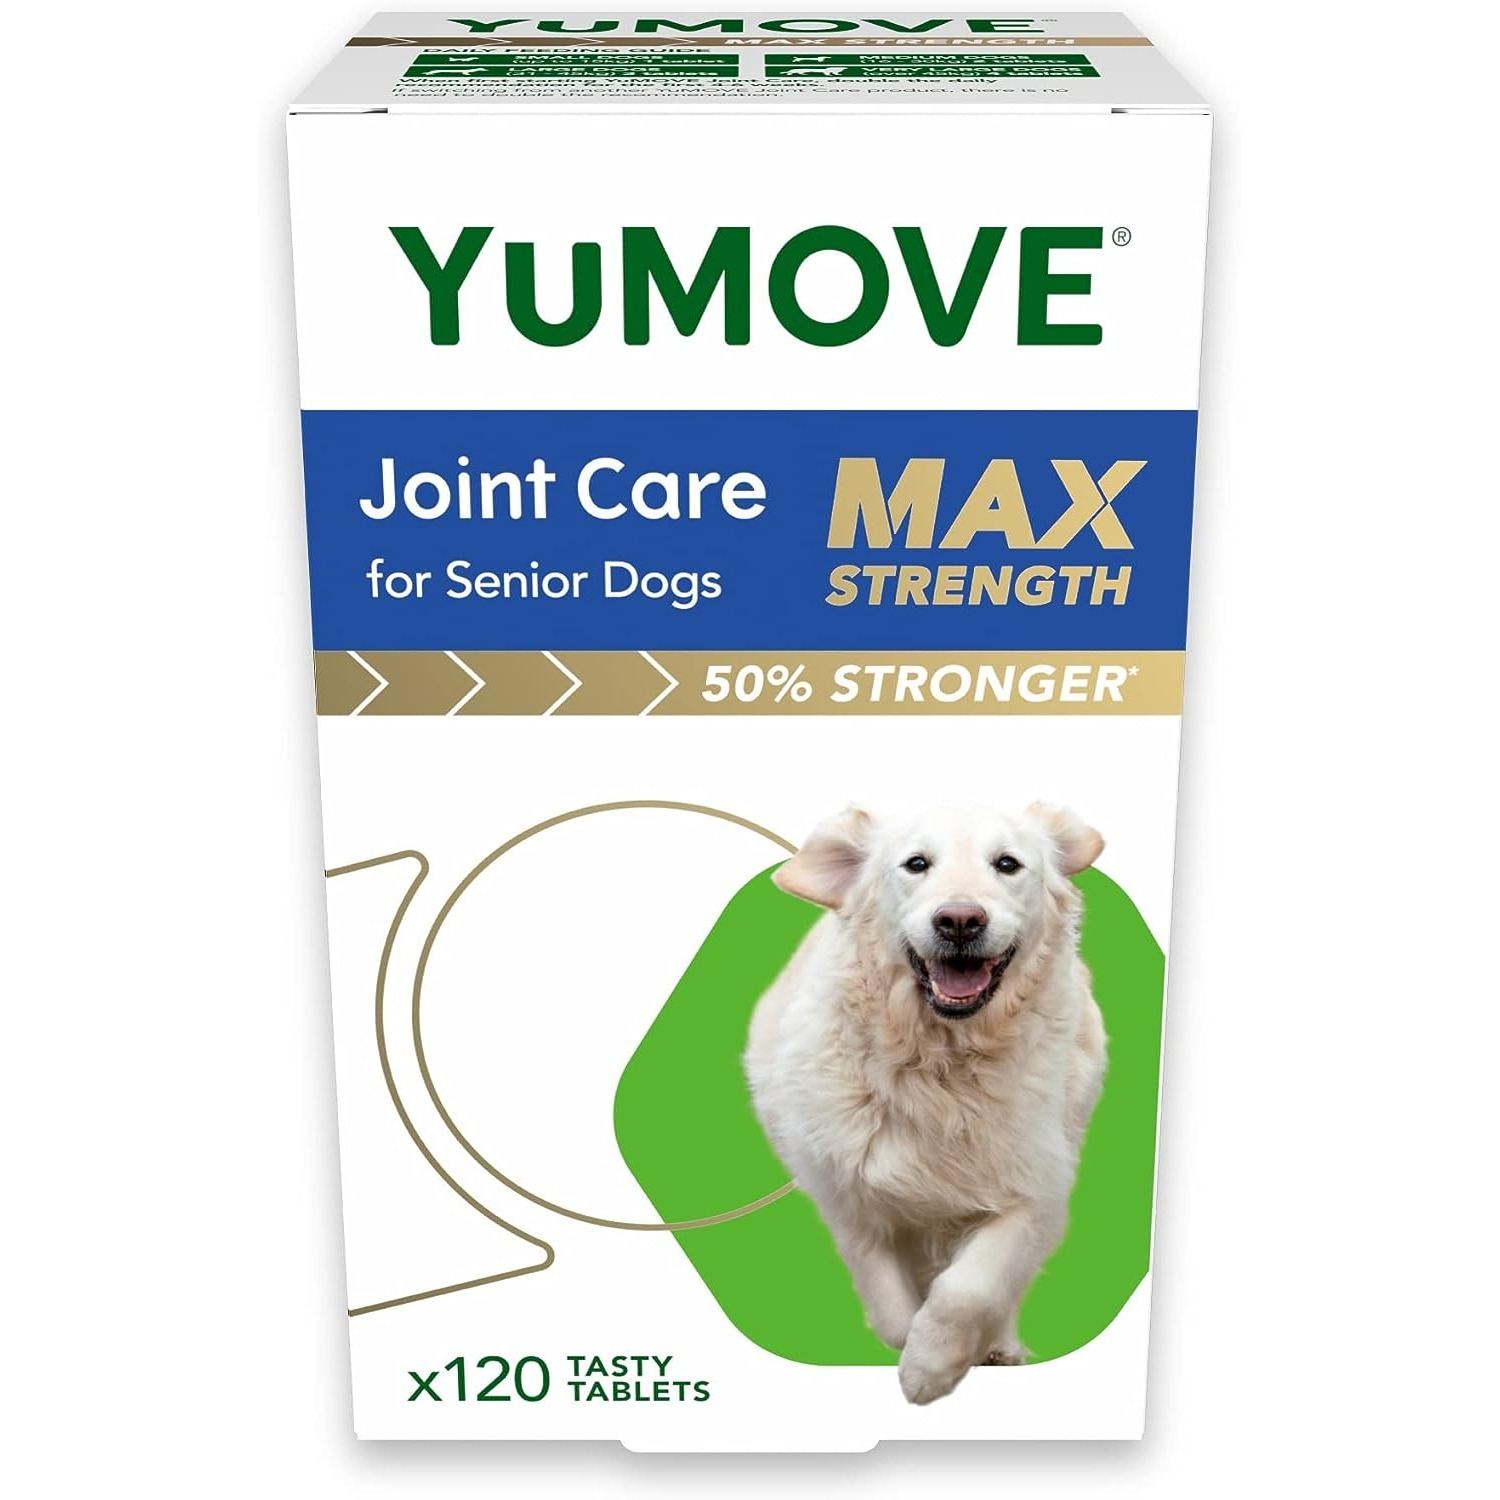 YuMOVE Max Strength Joint Care for Senior Dogs